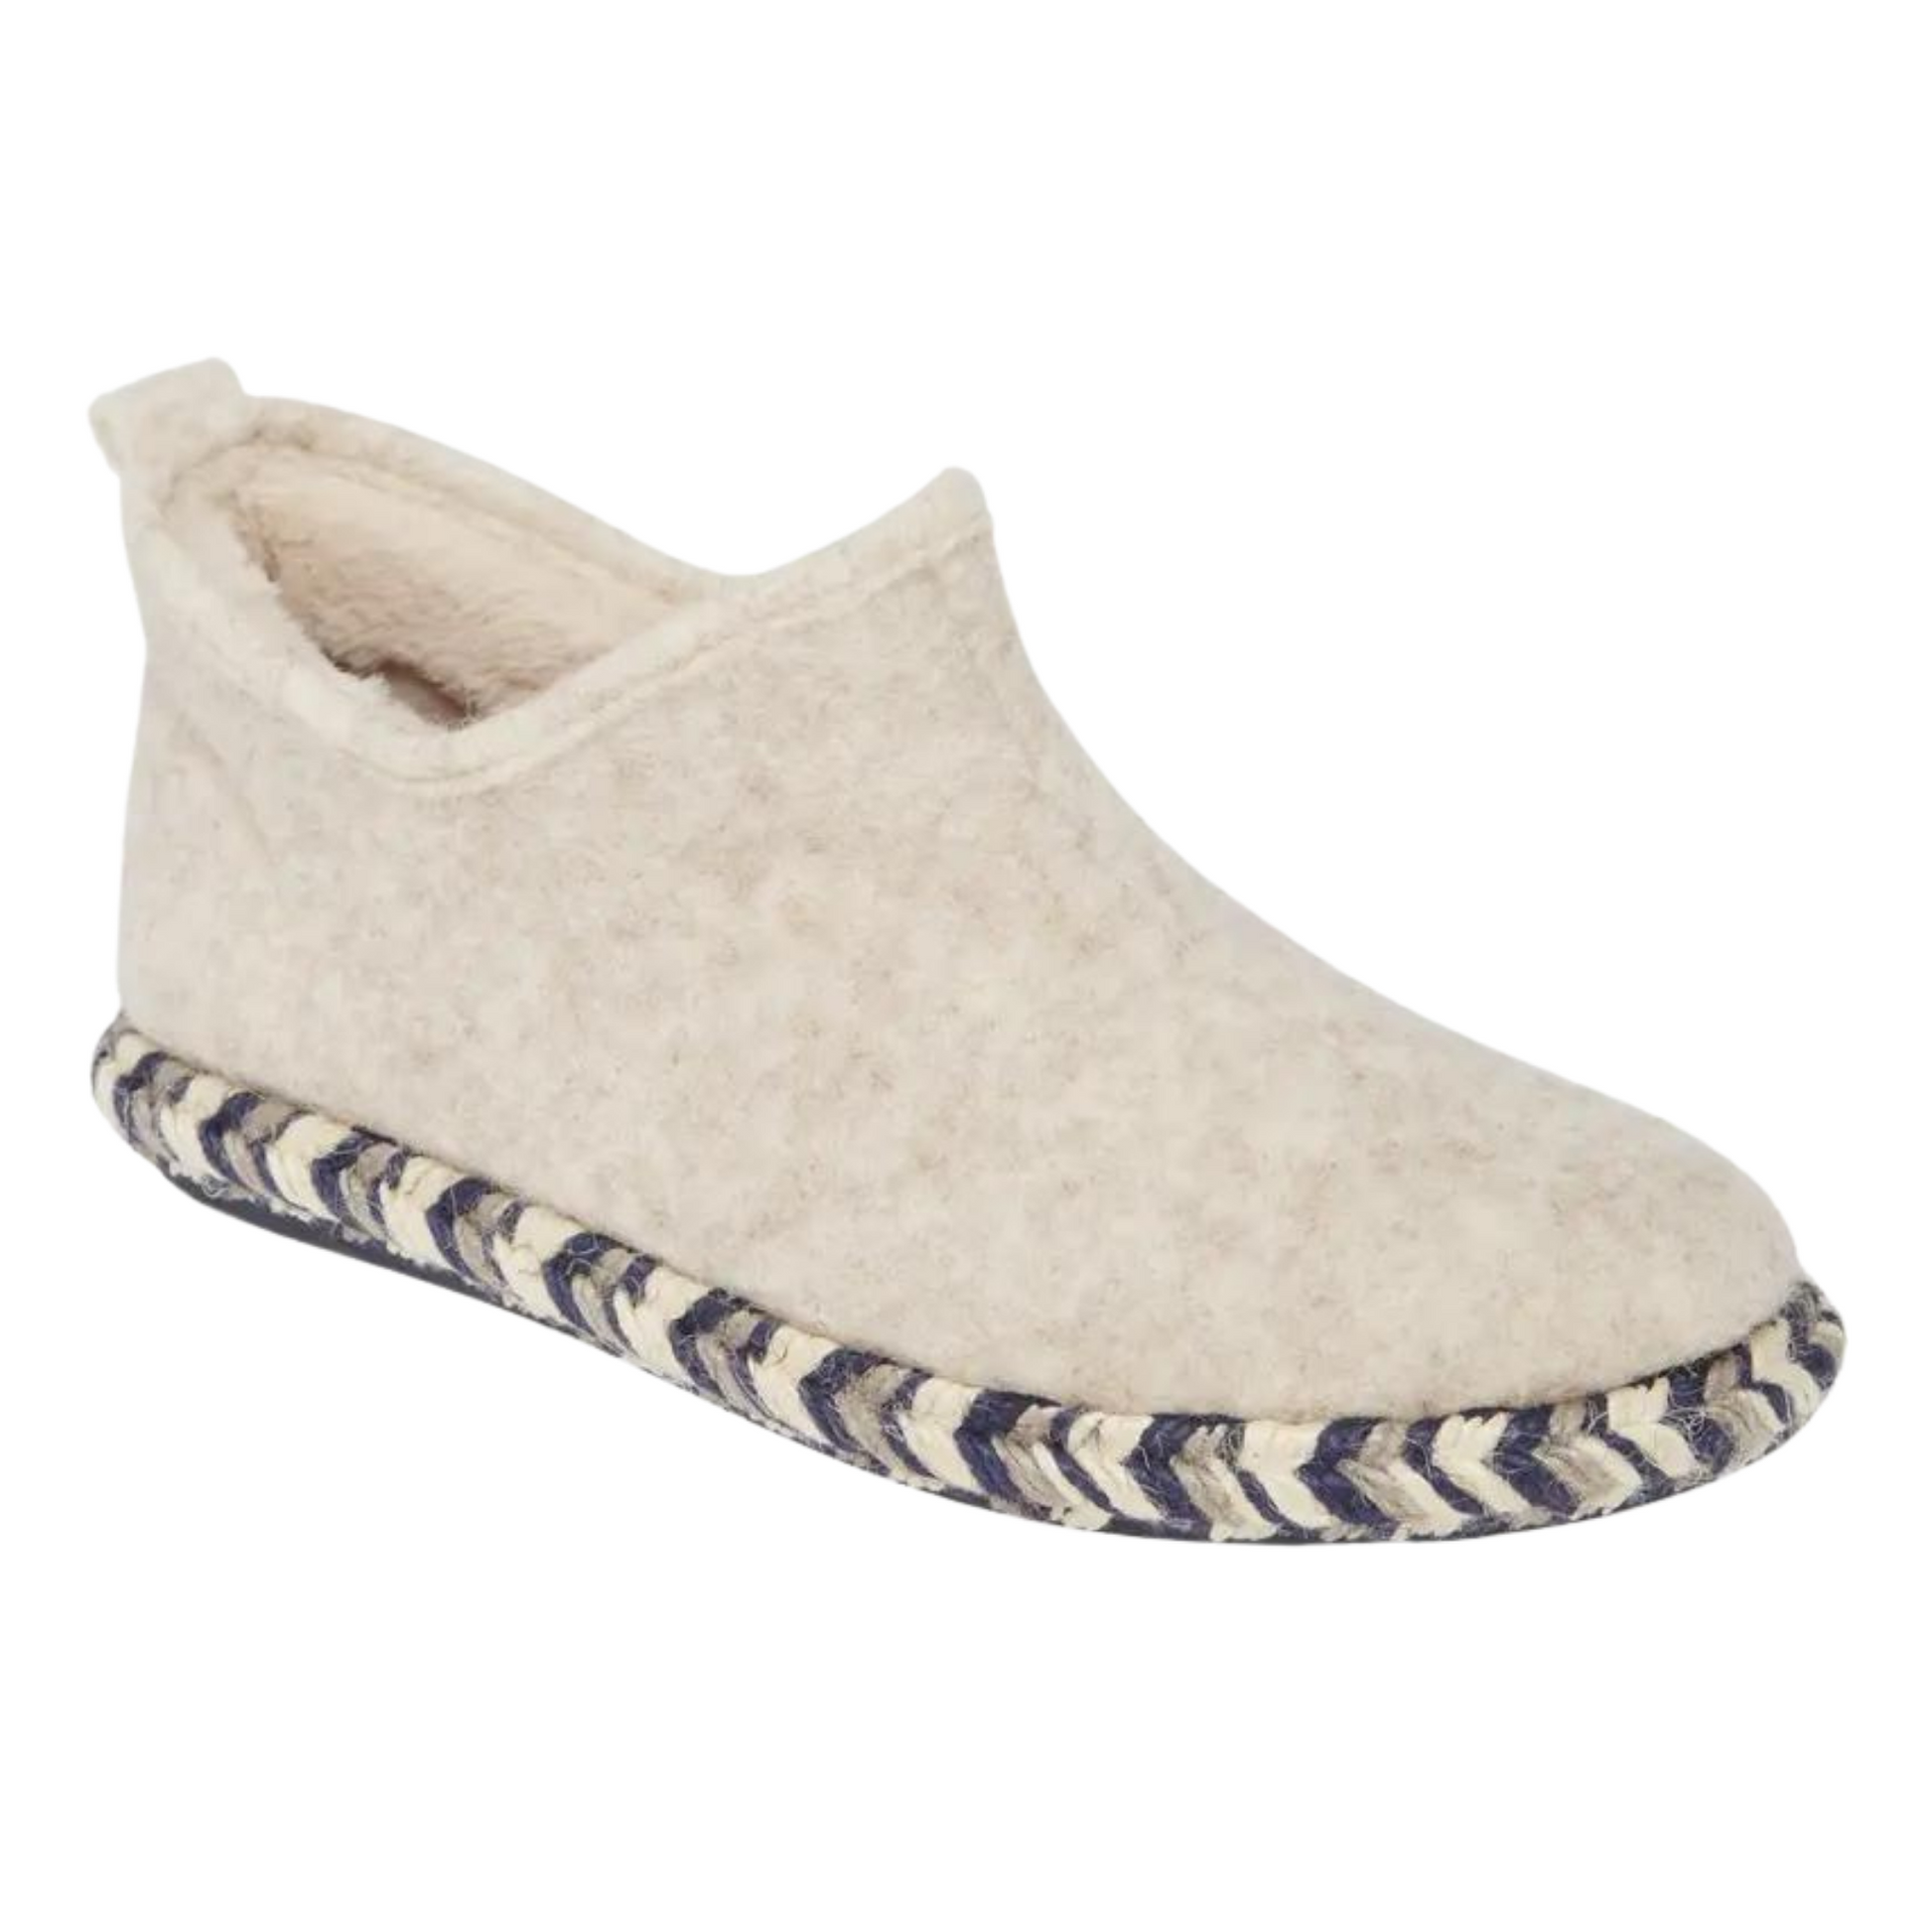 Cream coloured felted slipper with black, off-white, and beige chevron stitch lining the sole.